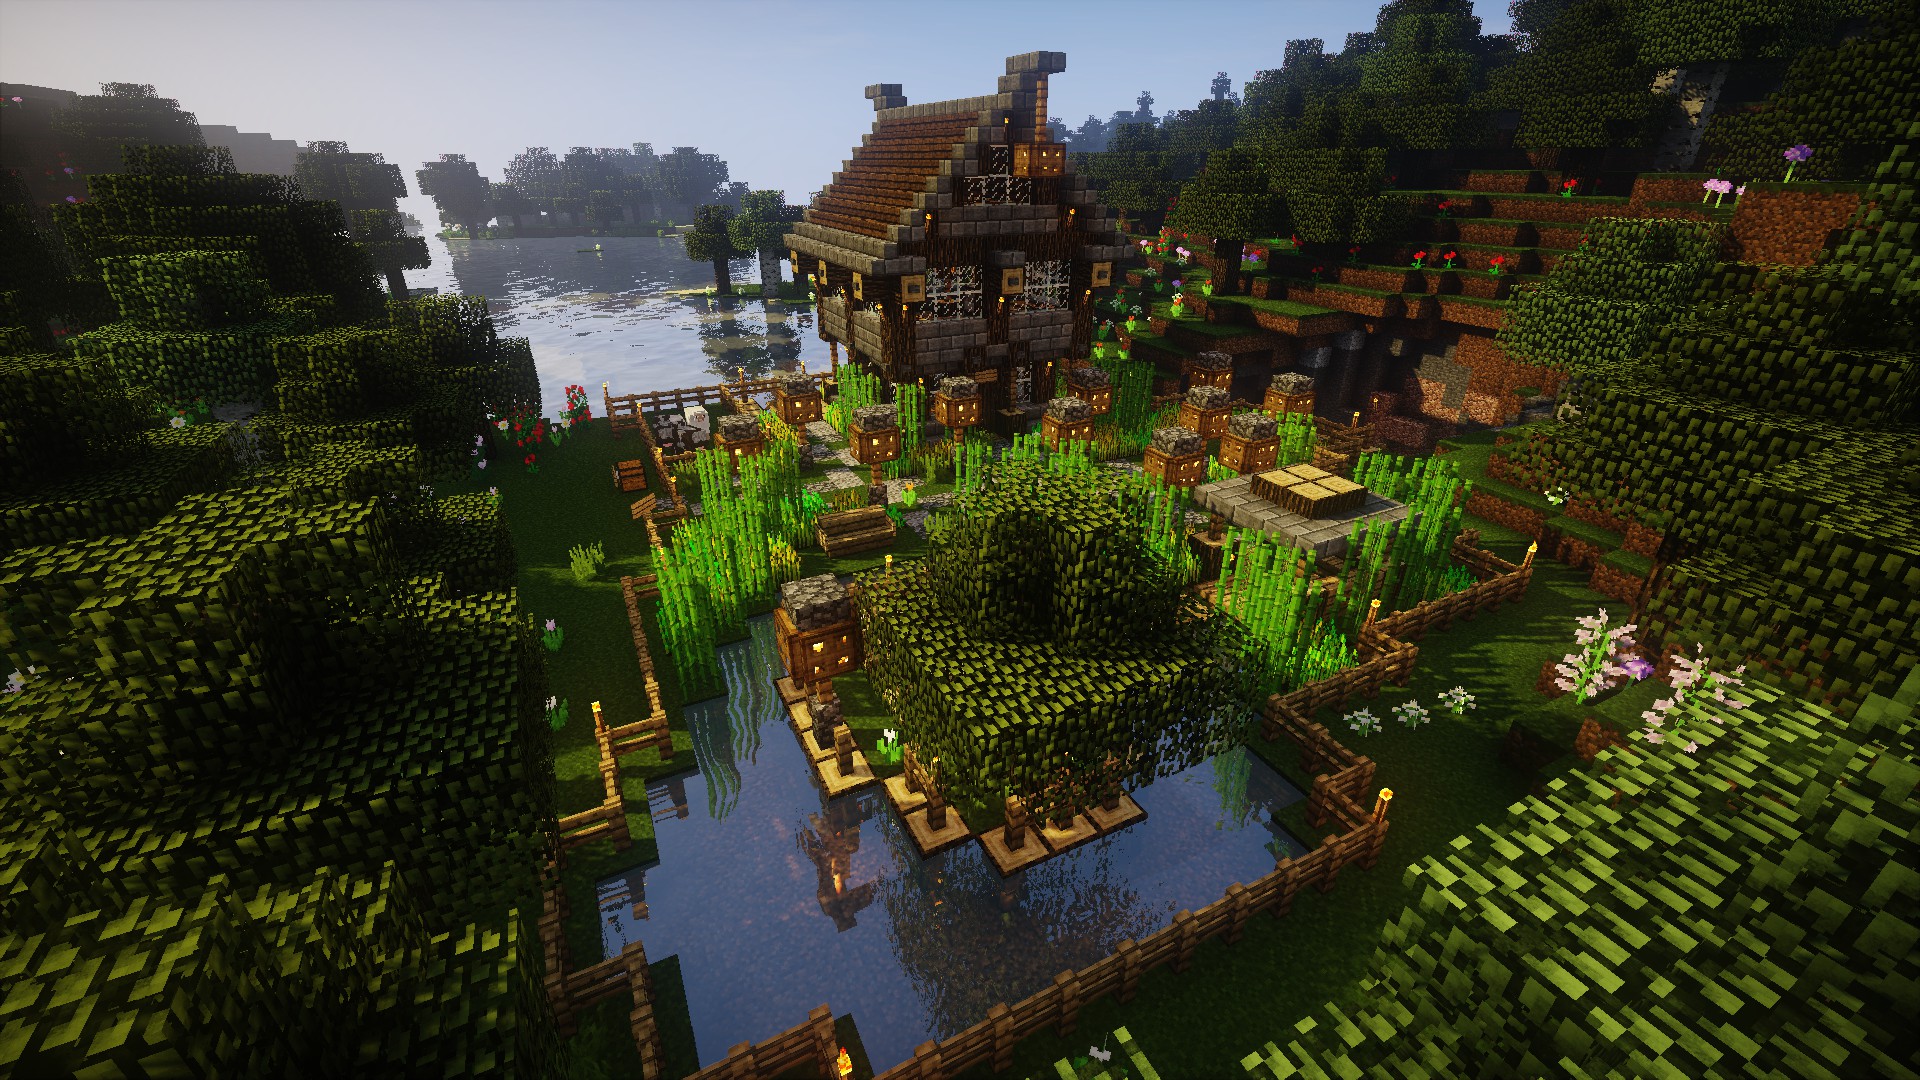 General 1920x1080 Minecraft video games farm house forest oak trees water grass Mojang video game landscape